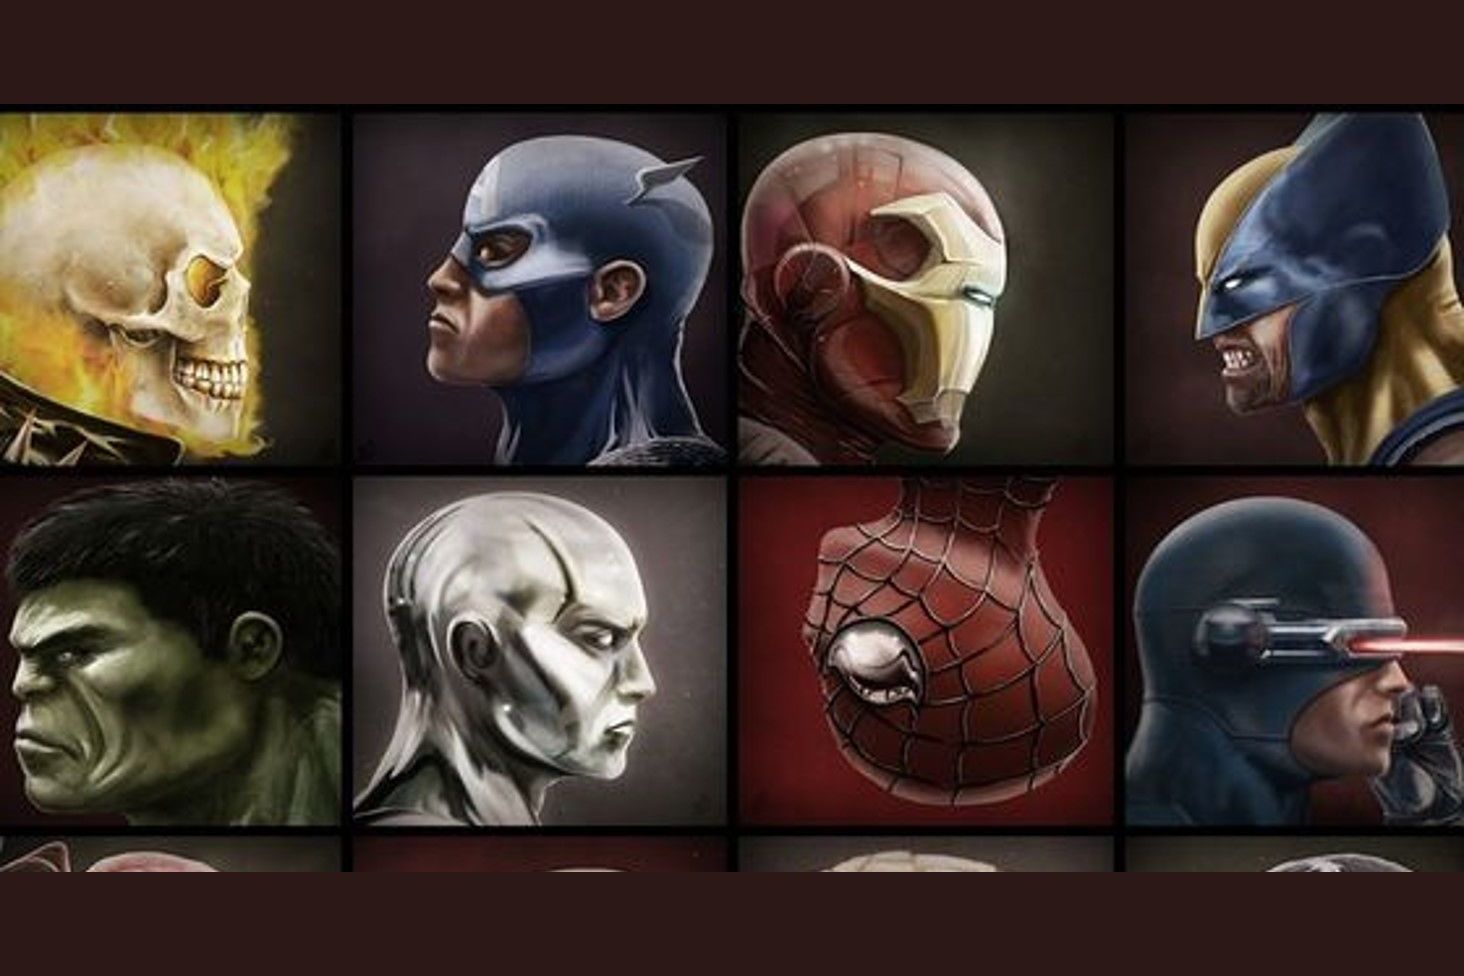 Which Marvel Character Are You